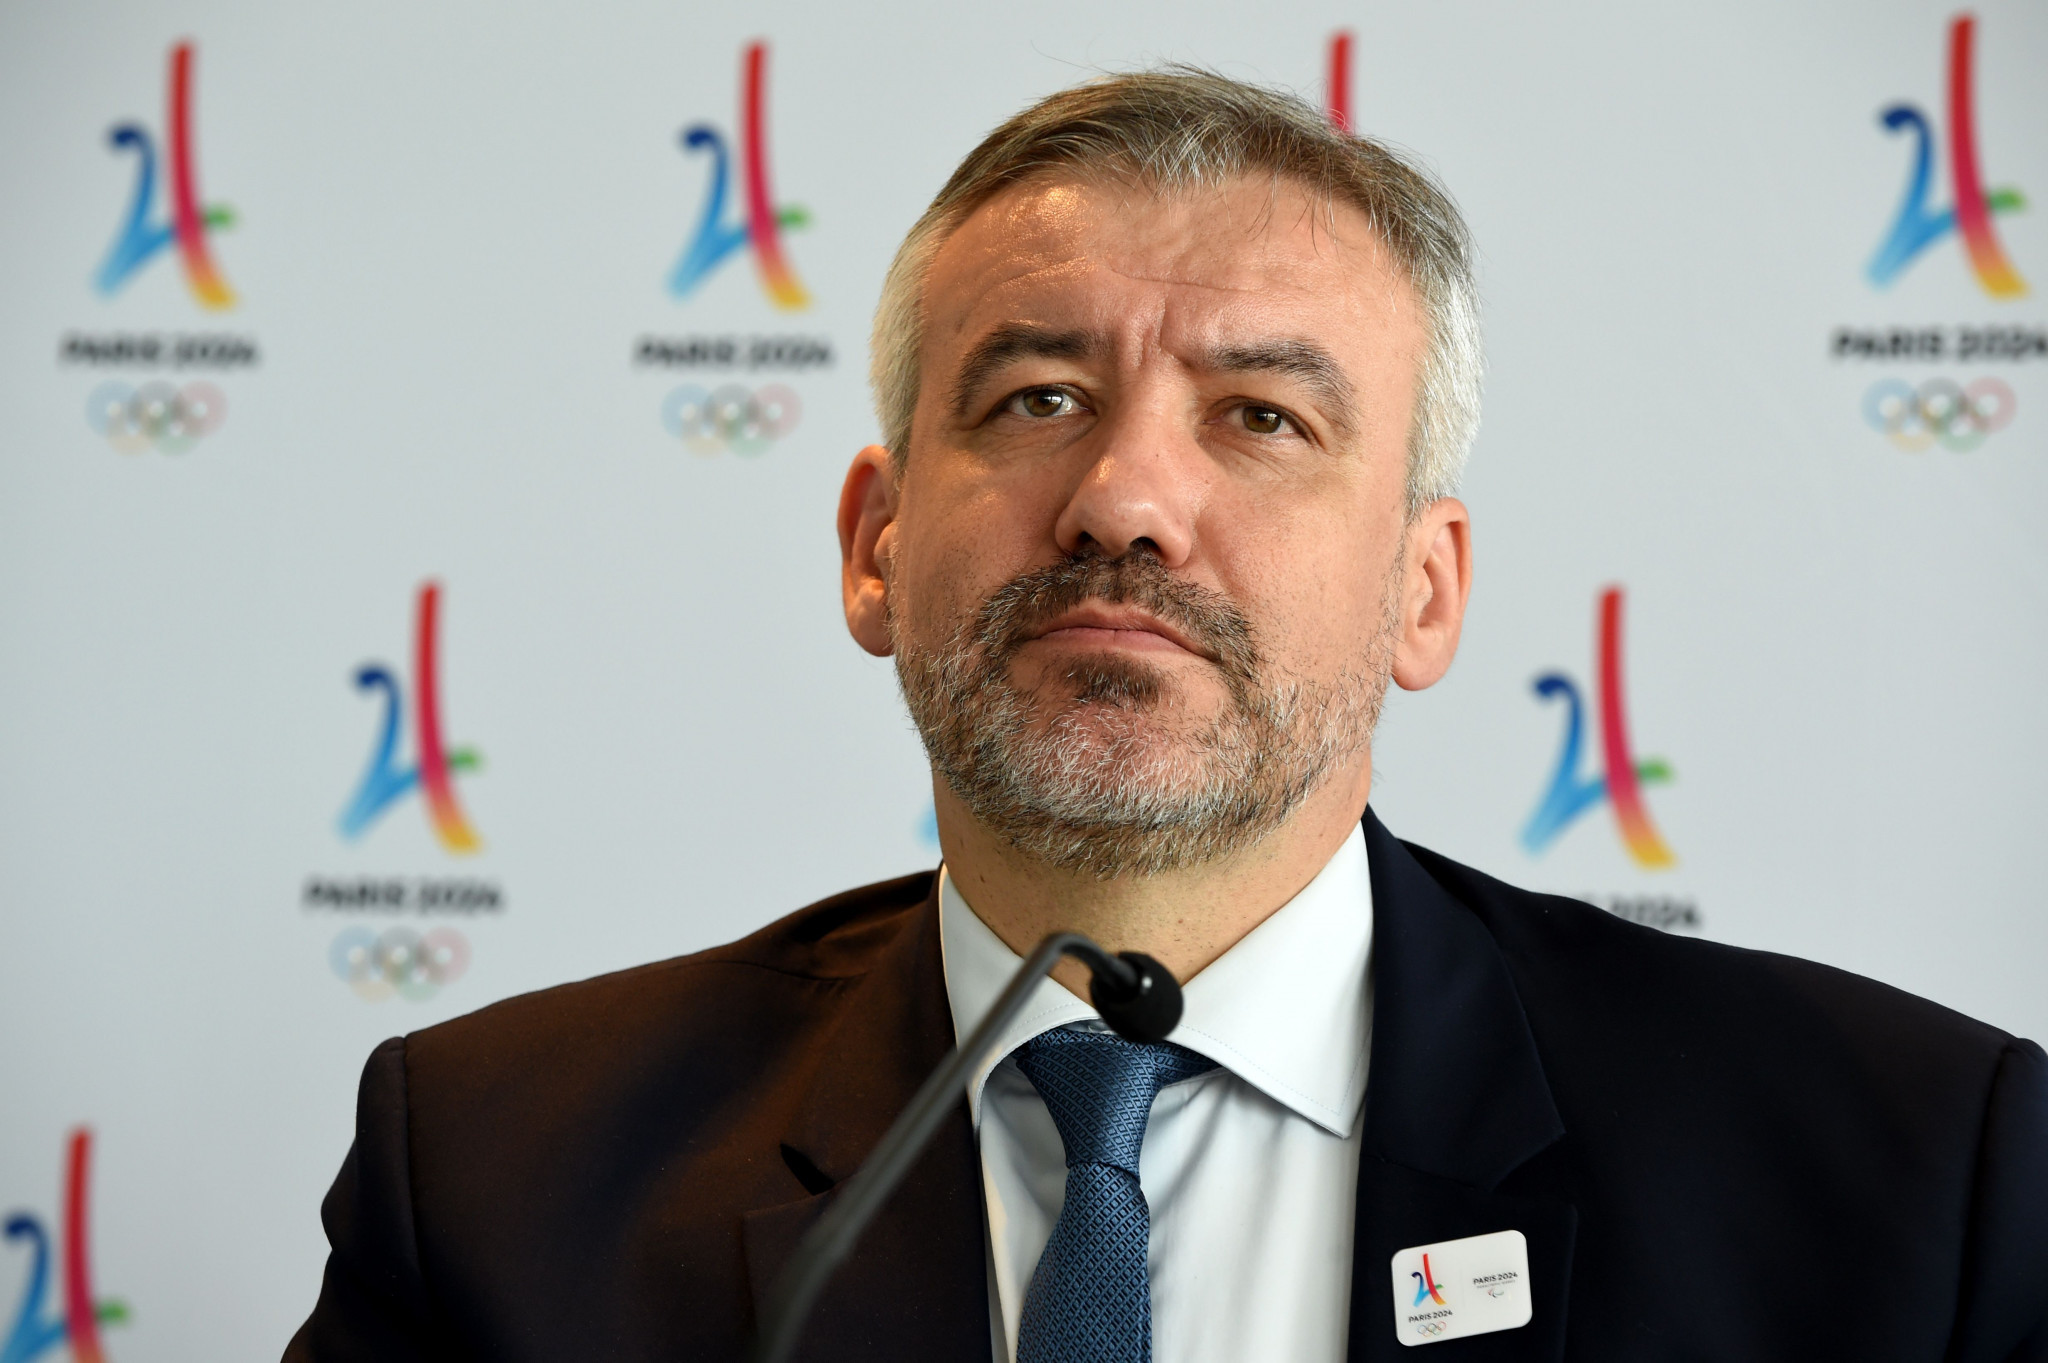 Paris 2024 "looking carefully" at simplification measures approved for Tokyo 2020